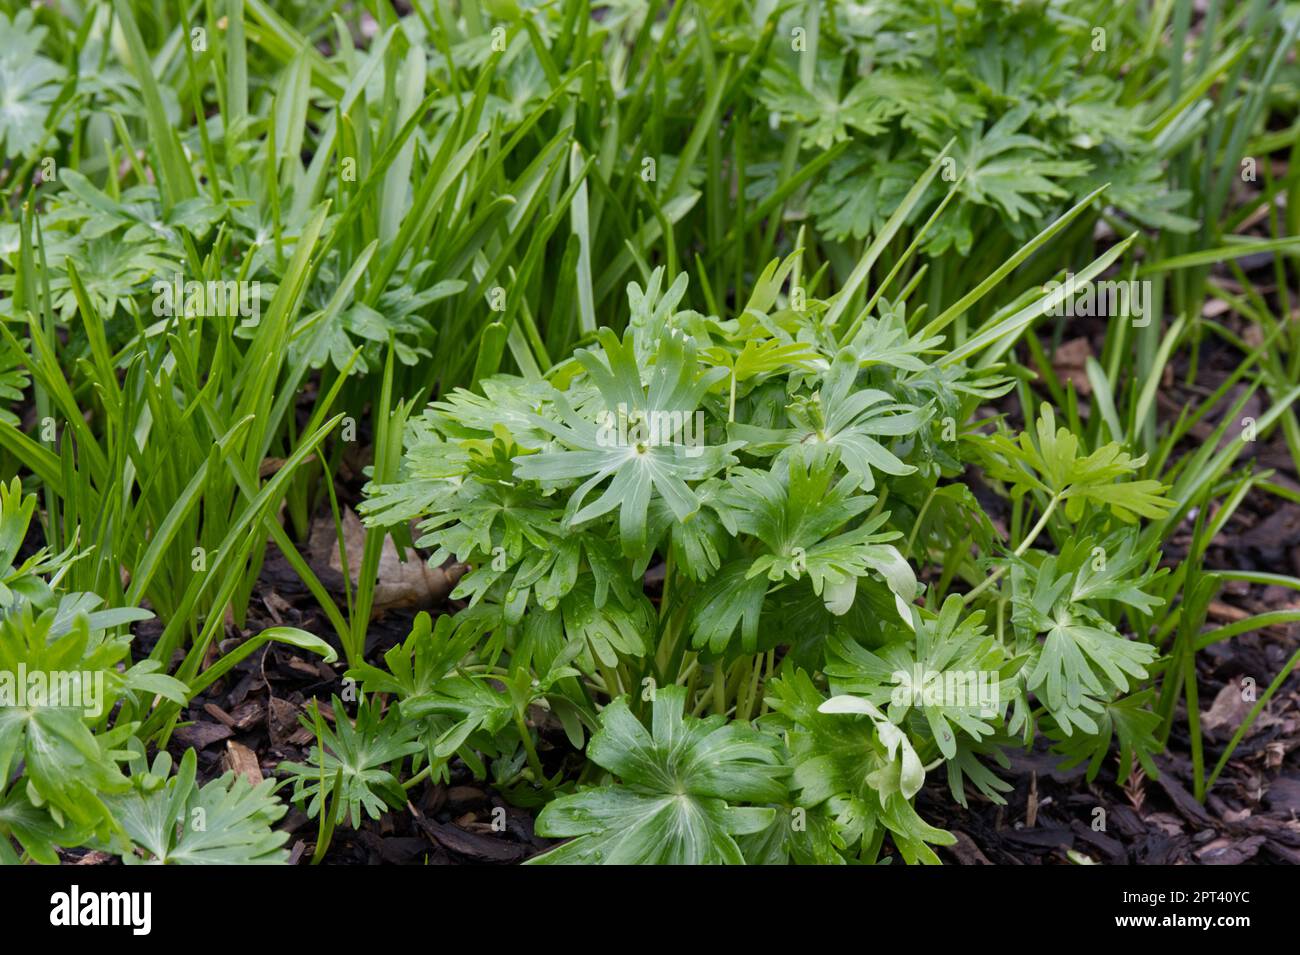 Fresh green foliage and unripe seed pods of winter aconite Eranthis hyemalis in UK garden April Stock Photo